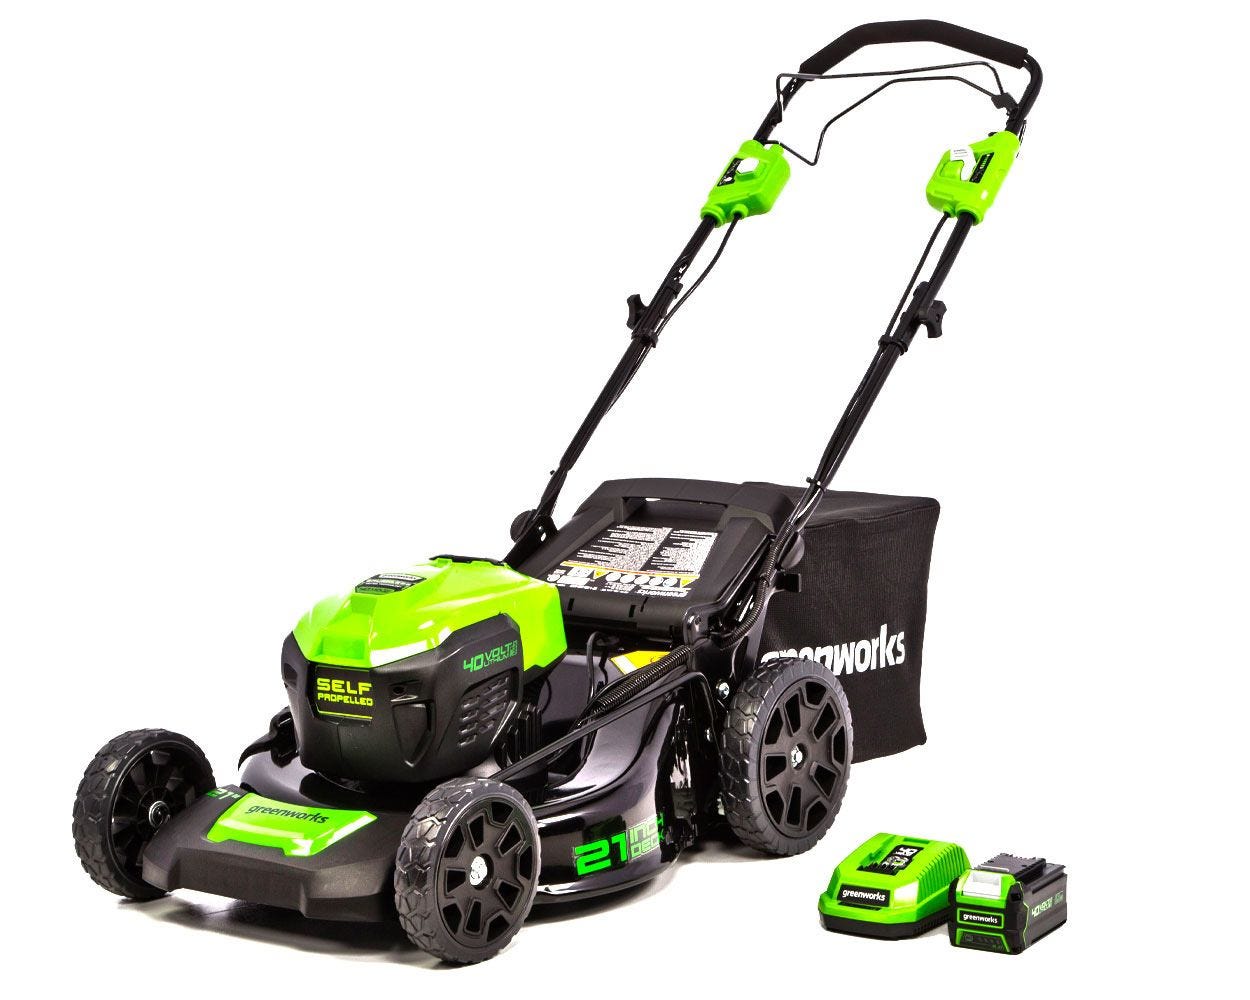 40V 21-Inch Self-Propelled Cordless Lawn Mower | Greenworks